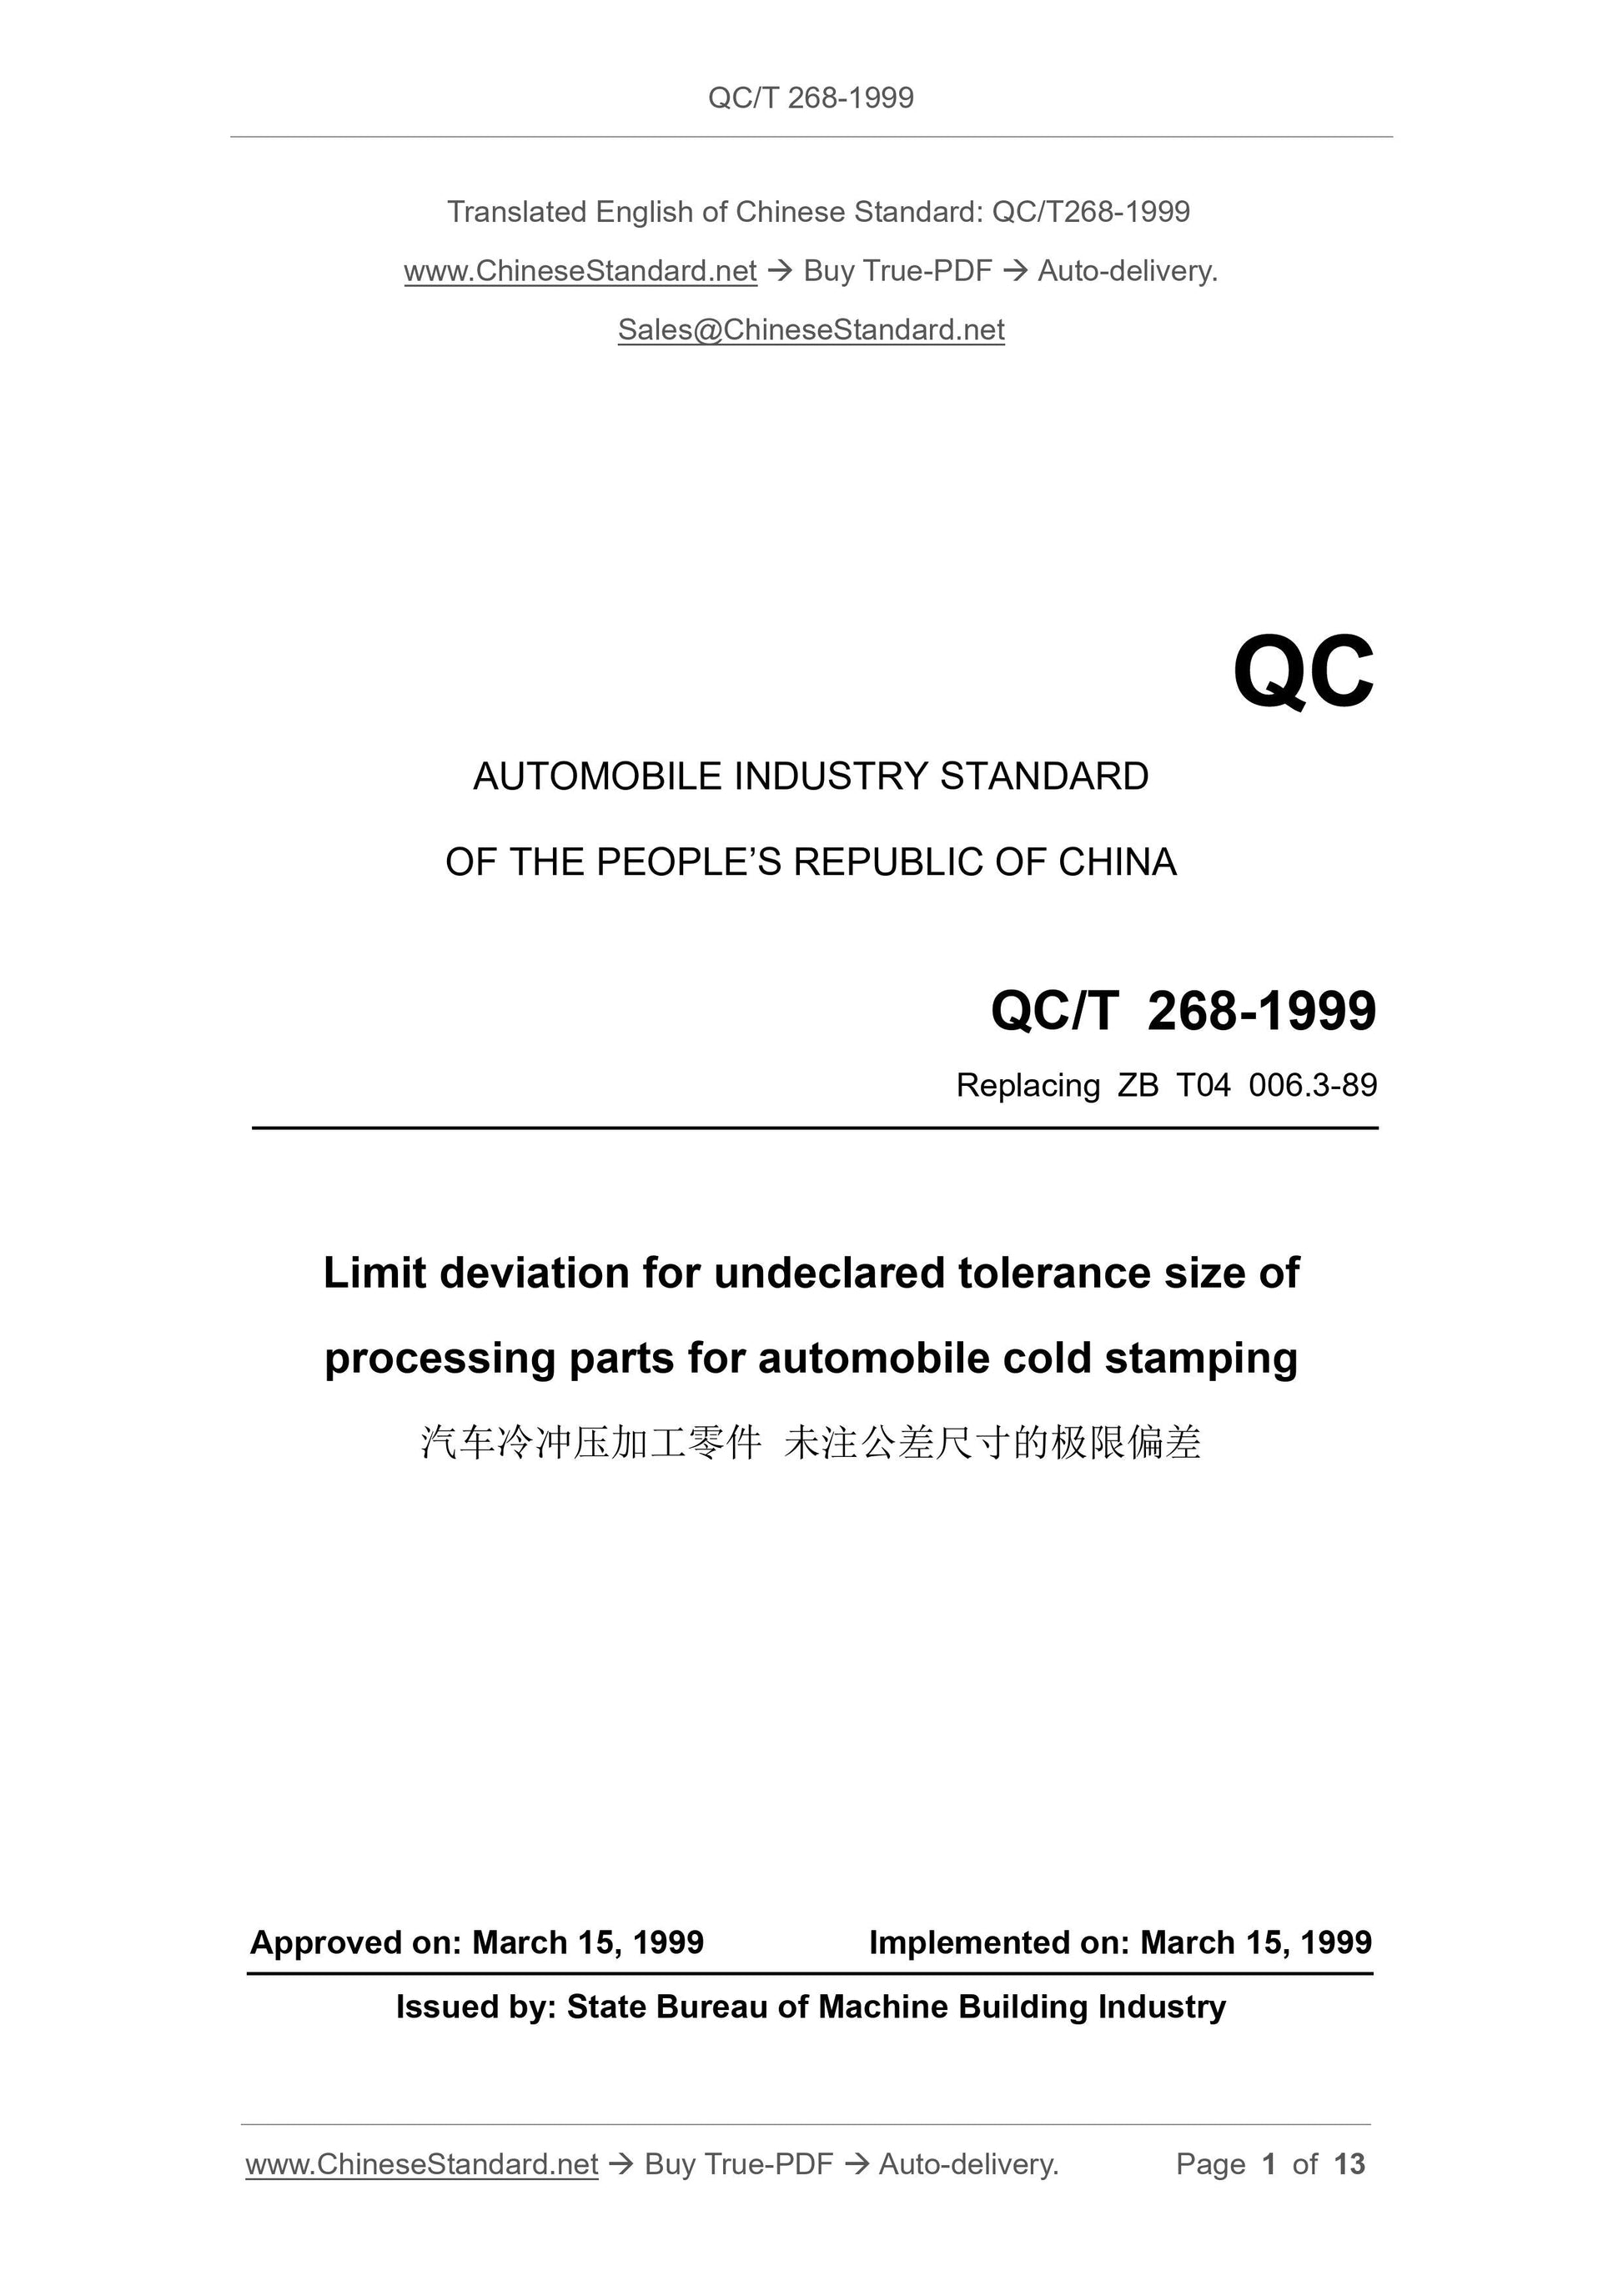 QC/T 268-1999 Page 1